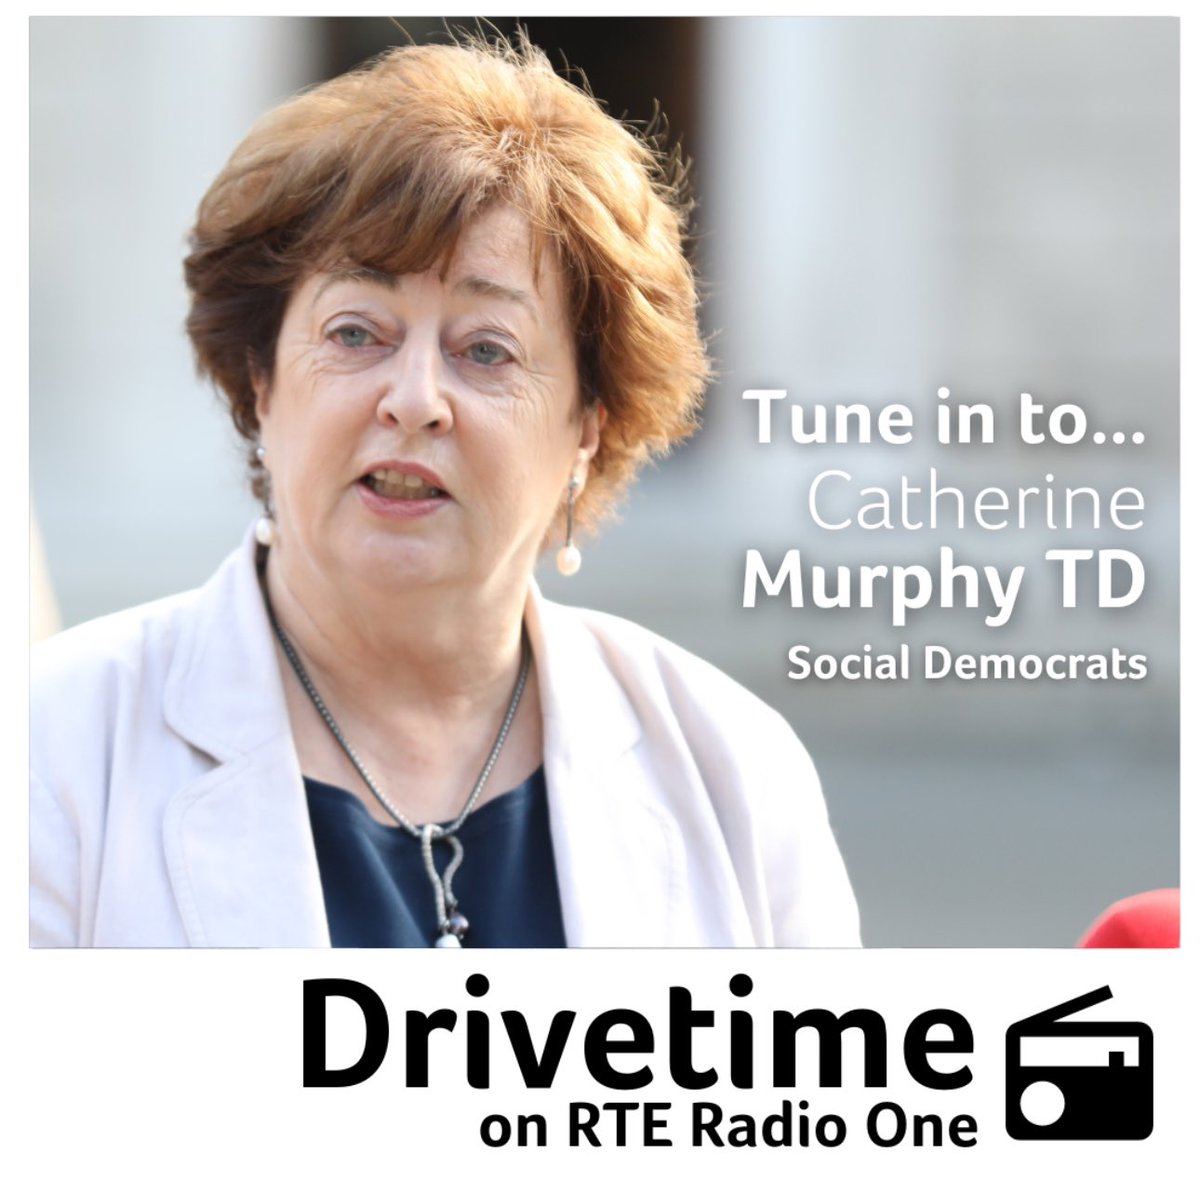 Coming up on @drivetimerte, @CathMurphyTD is joining the show to discuss the crisis at RTÉ. Tune in from 6pm 📻